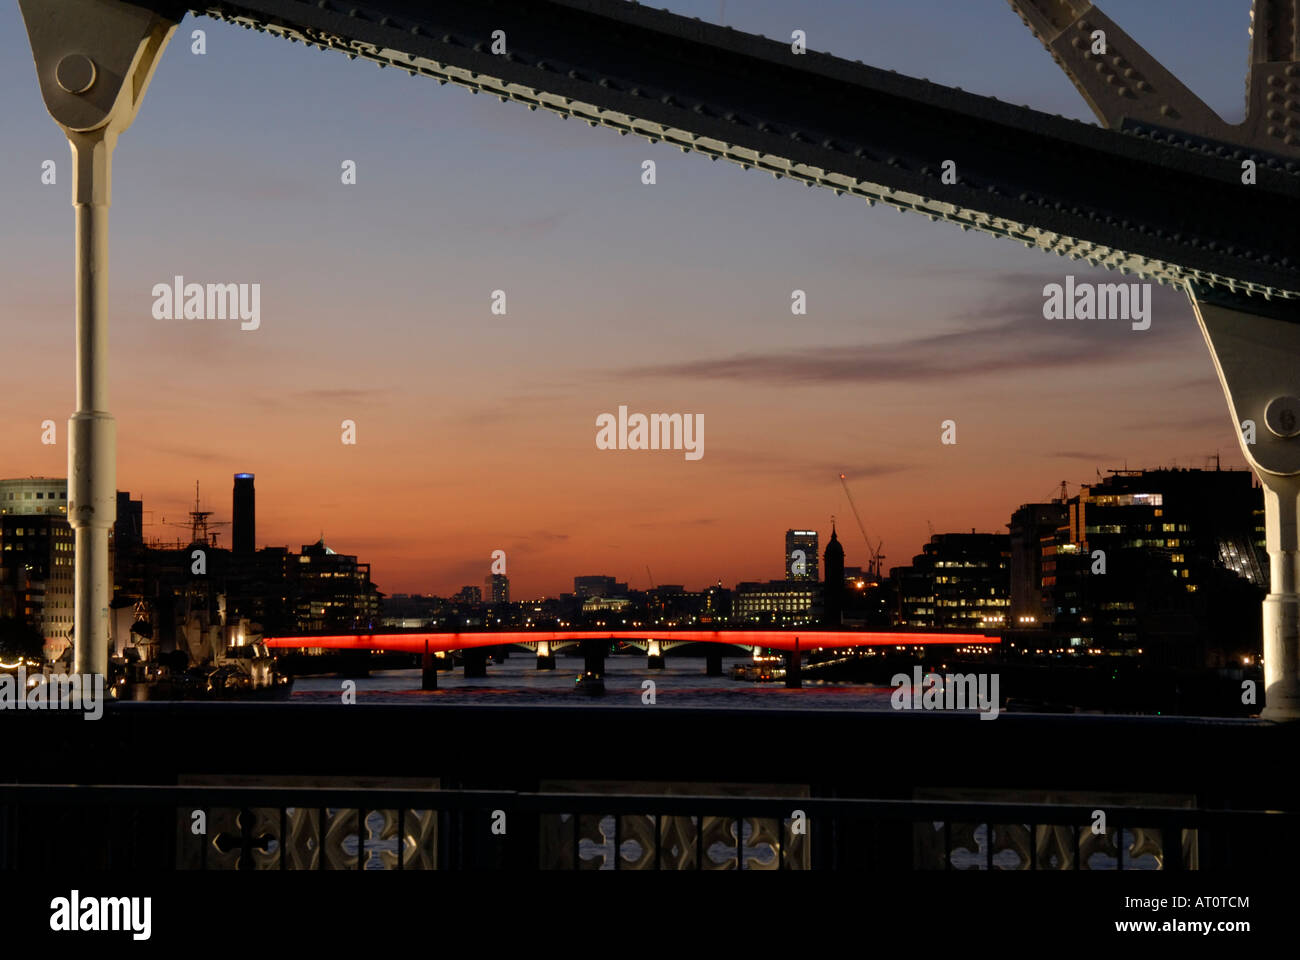 London Bridge 1973 over the river Thames viewed at night from Tower Bridge sunset Stock Photo